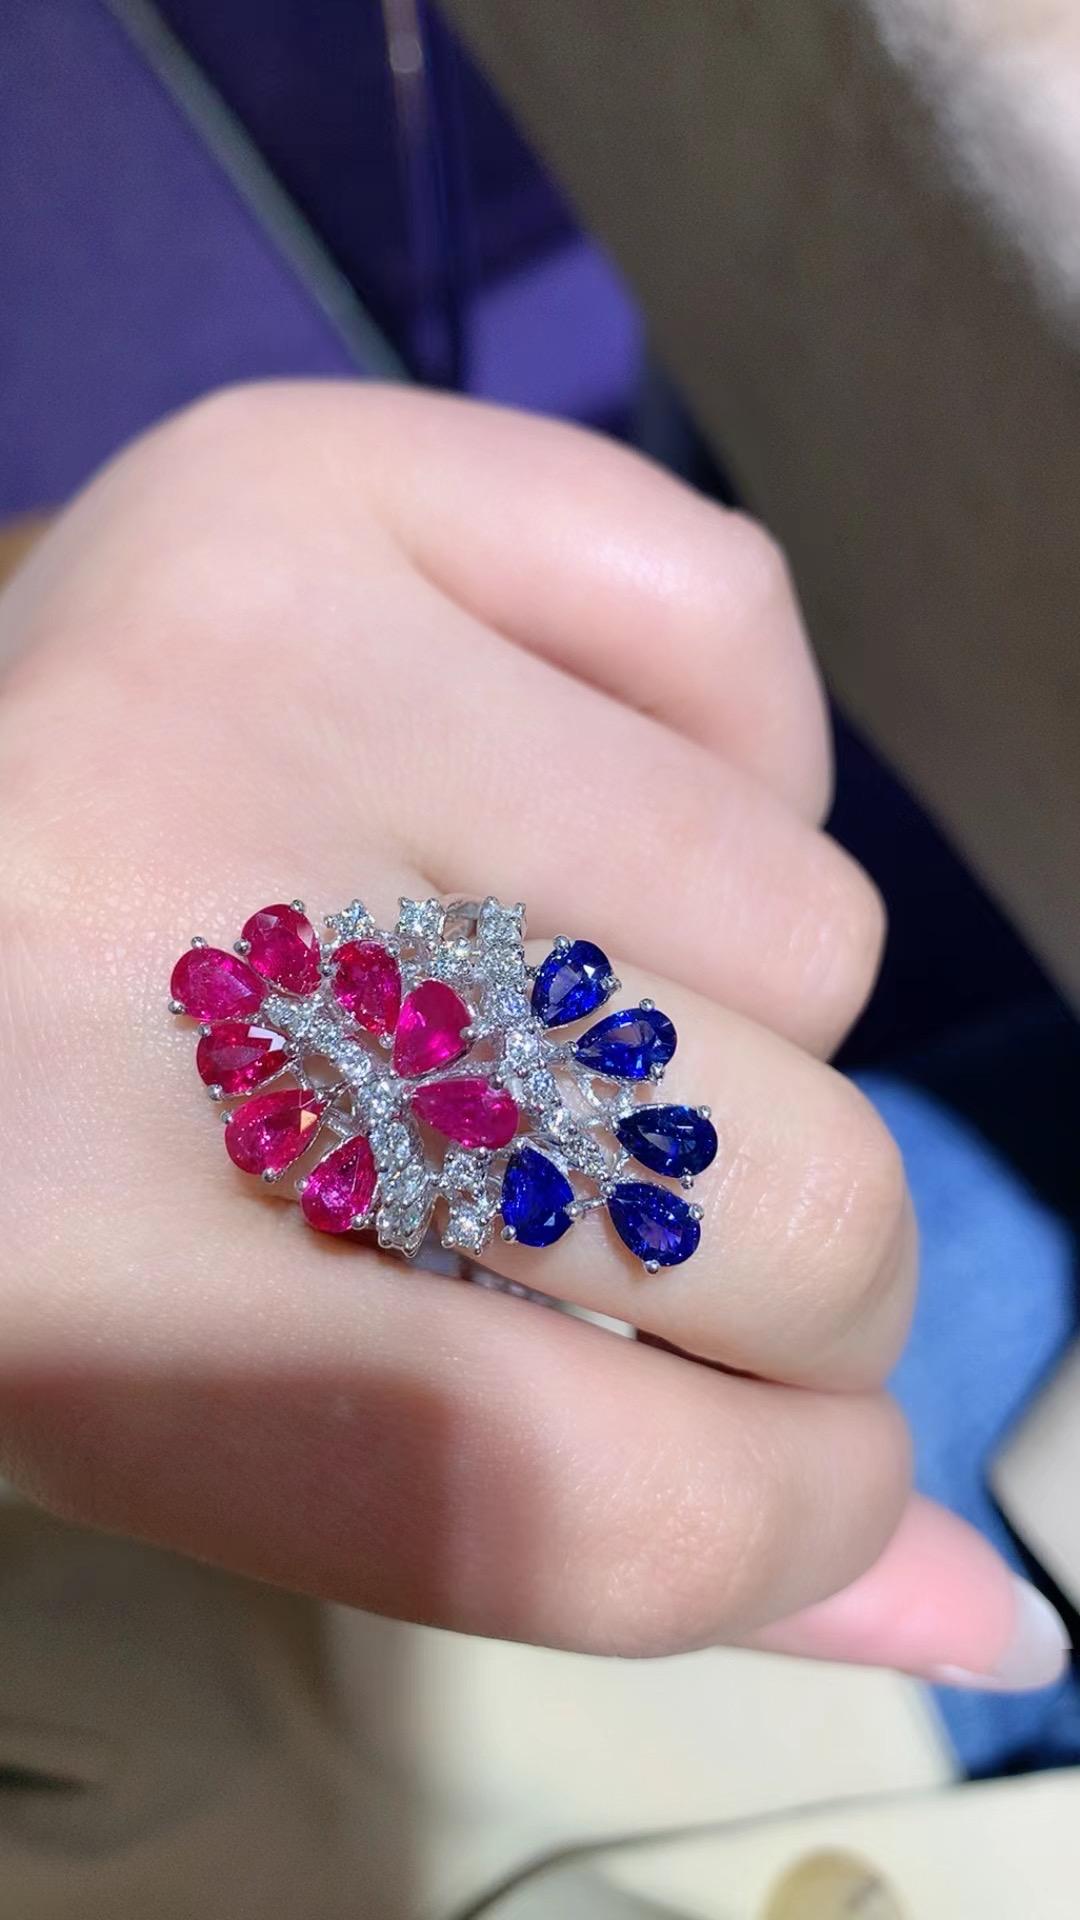 Set in 18k White Gold, 3.42 Carats, Ruby, Blue Sapphire & Diamonds Cocktail Ring For Sale 3